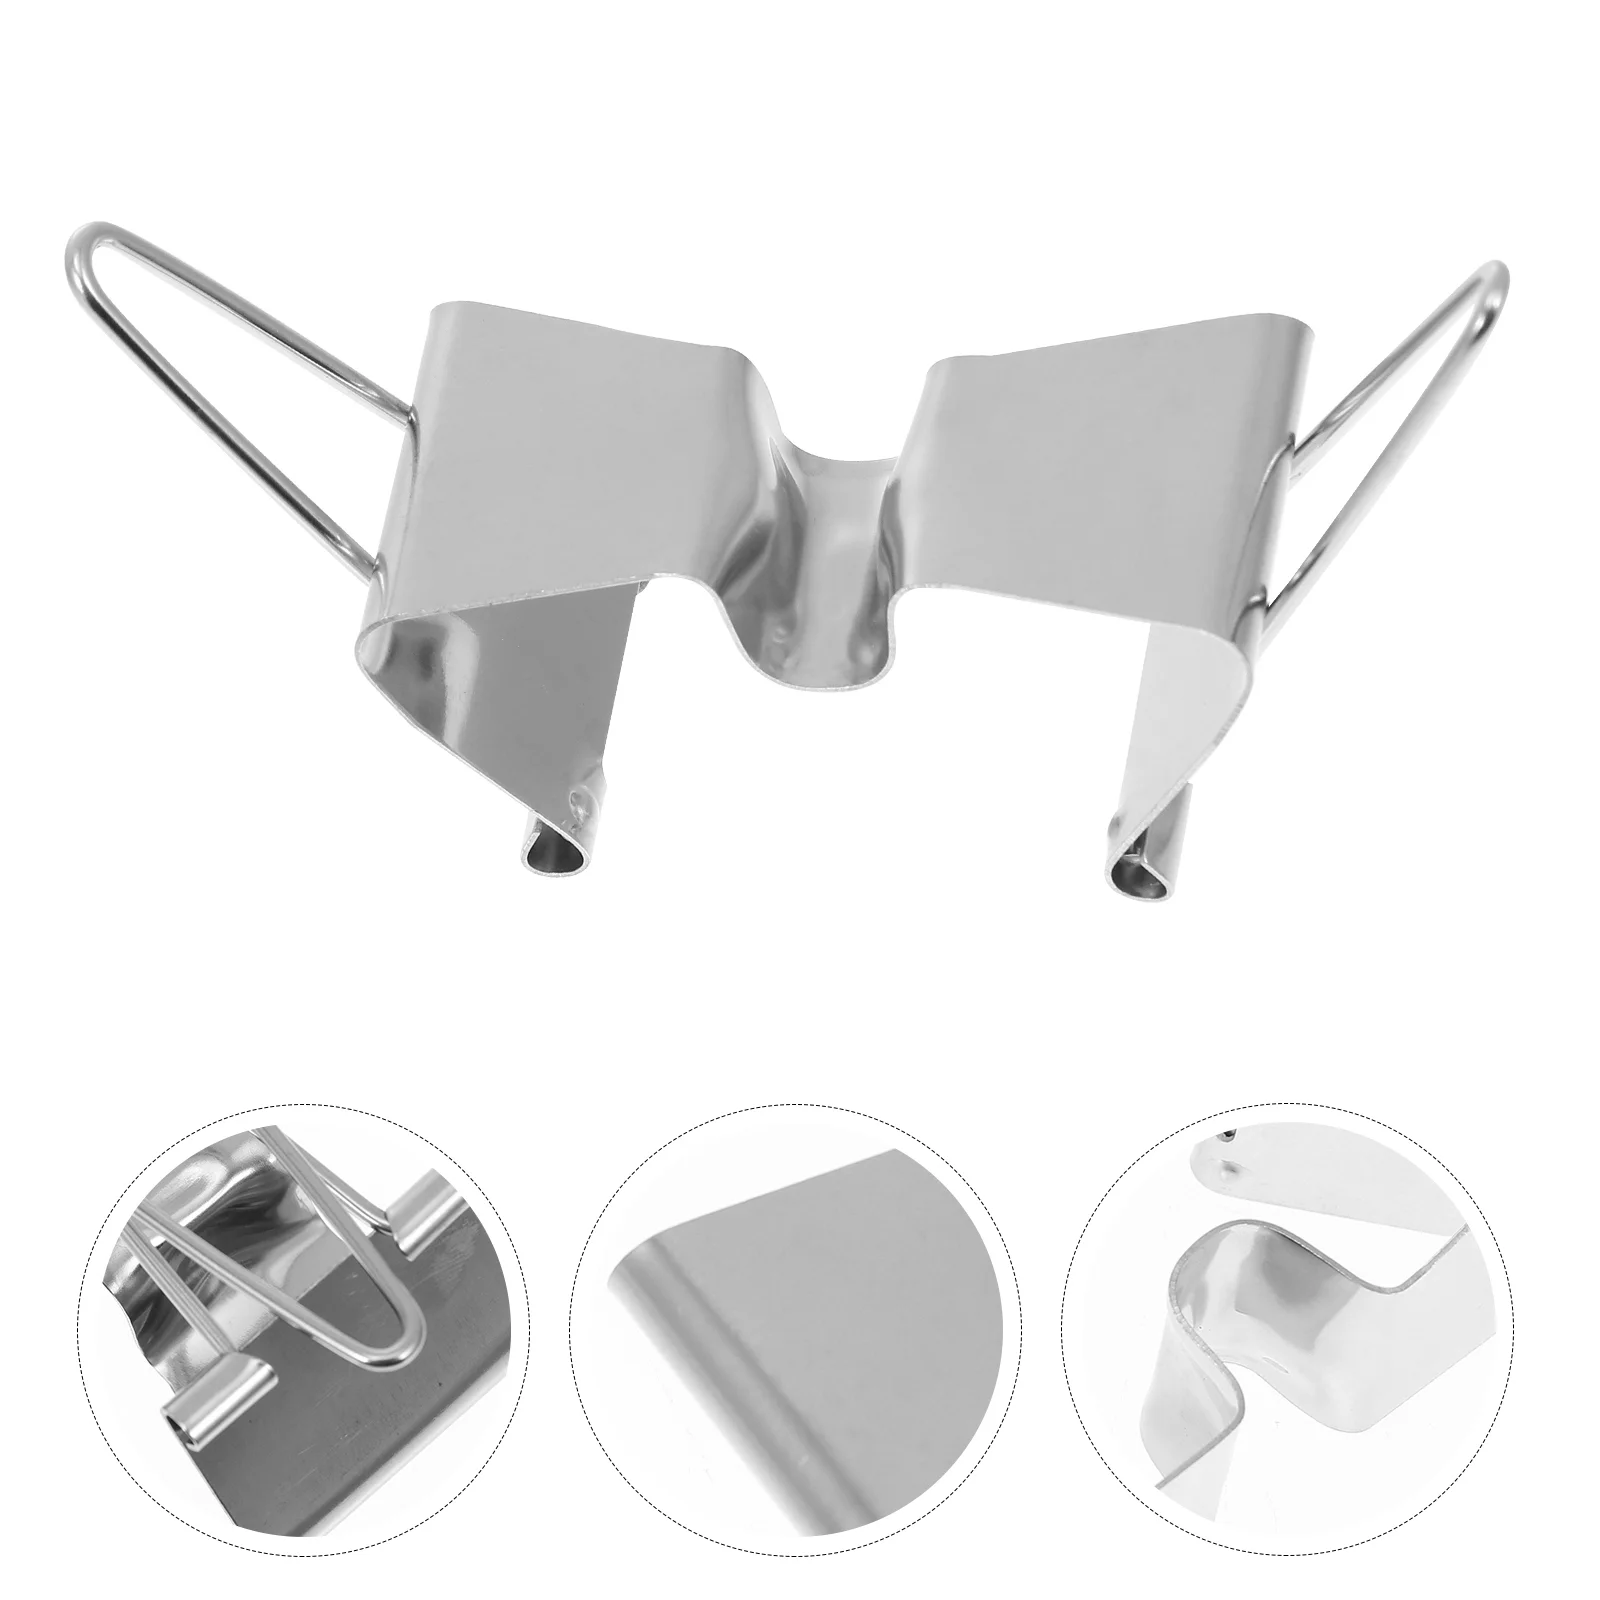 

2 Pcs Canvas Clip Wet Clamps Supplies Stands Artist Gift Stainless Steel Frame Holder Metal Carrier Bracket Painting Clips